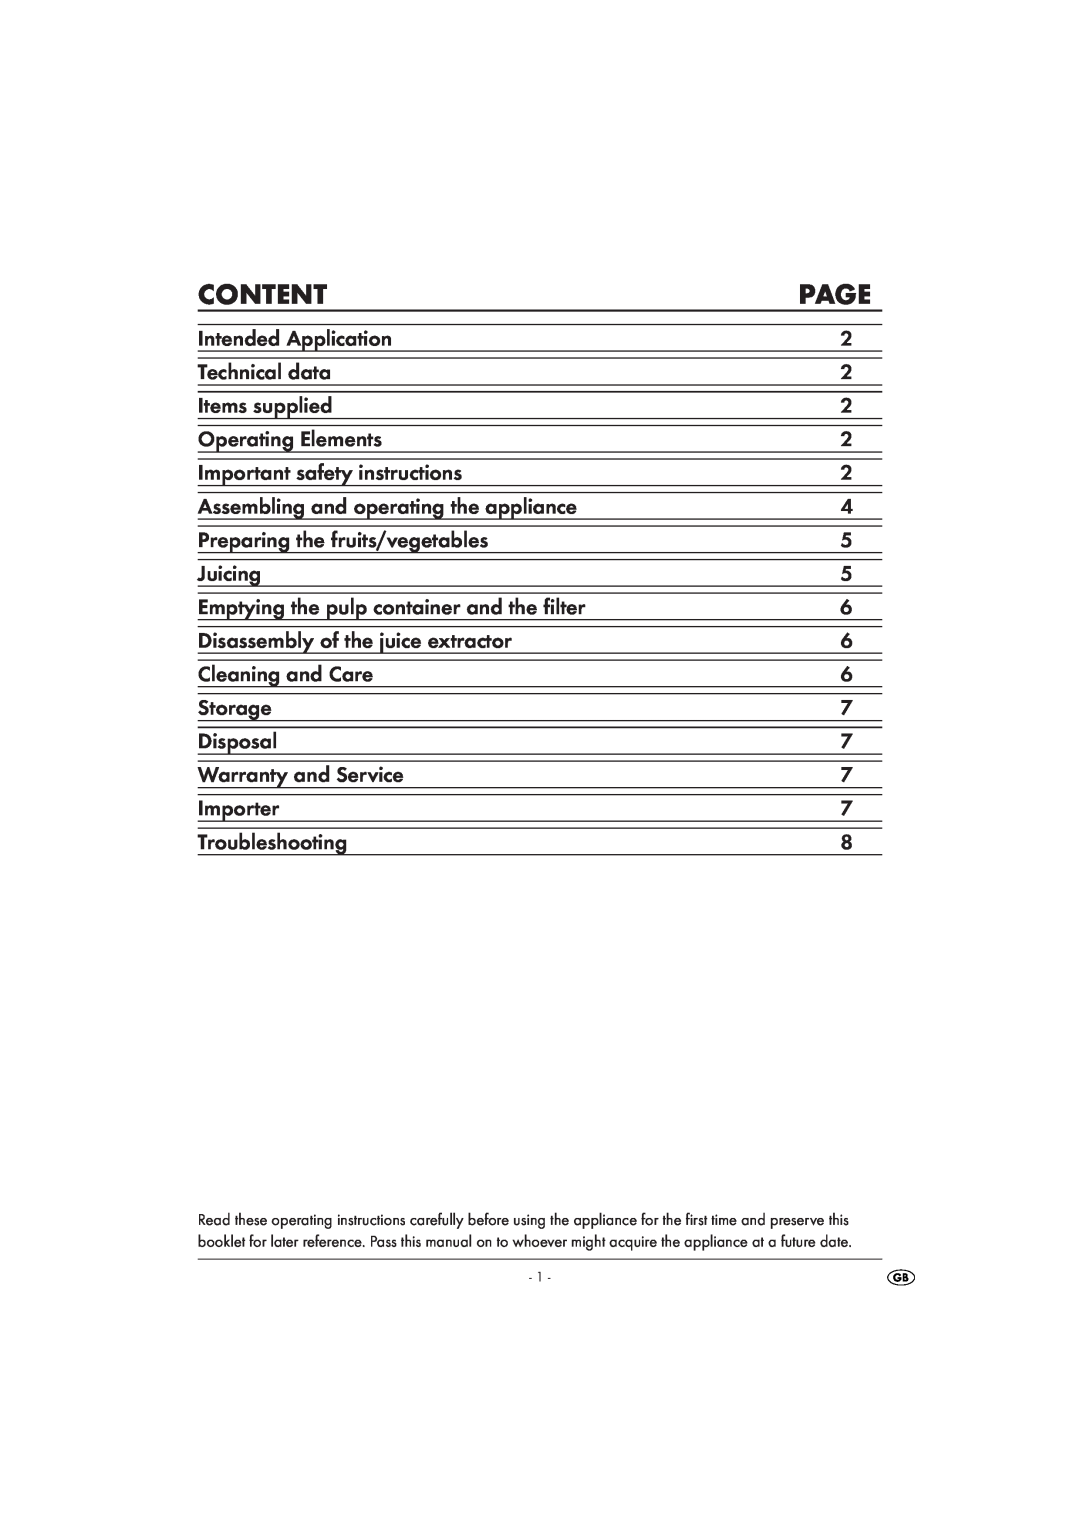 Silvercrest KH 451 manual Content, Page 